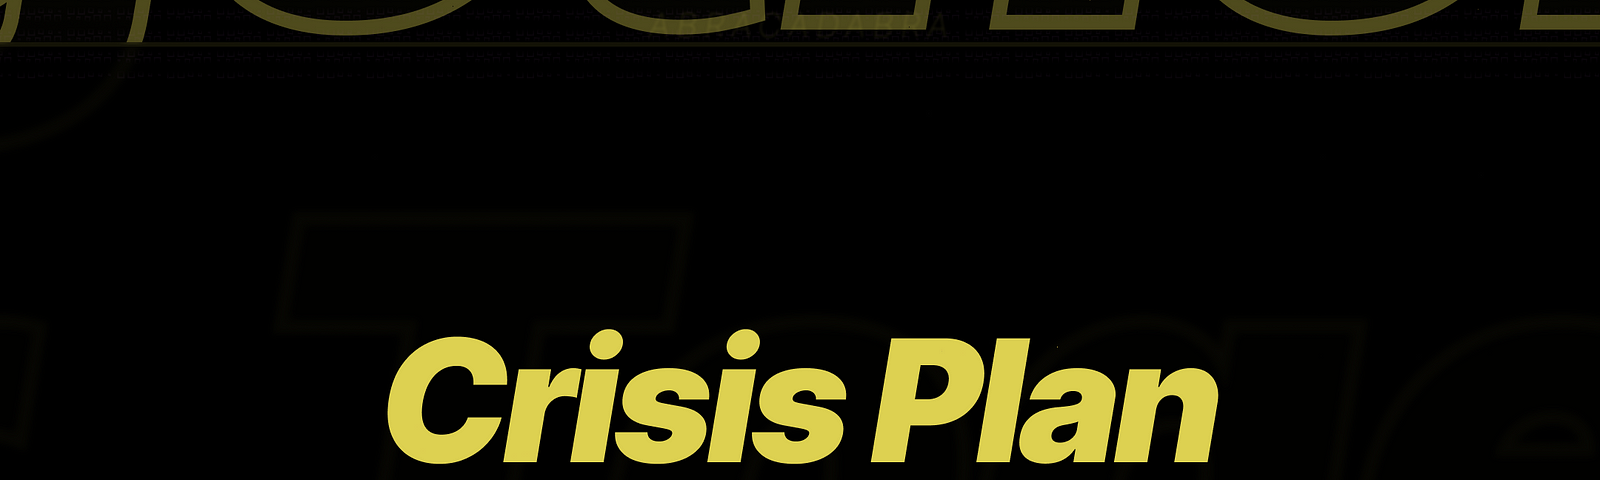 Stalk Yourself image from Arnaud Revel Goulihi’s article with “Crisis Plan” written.